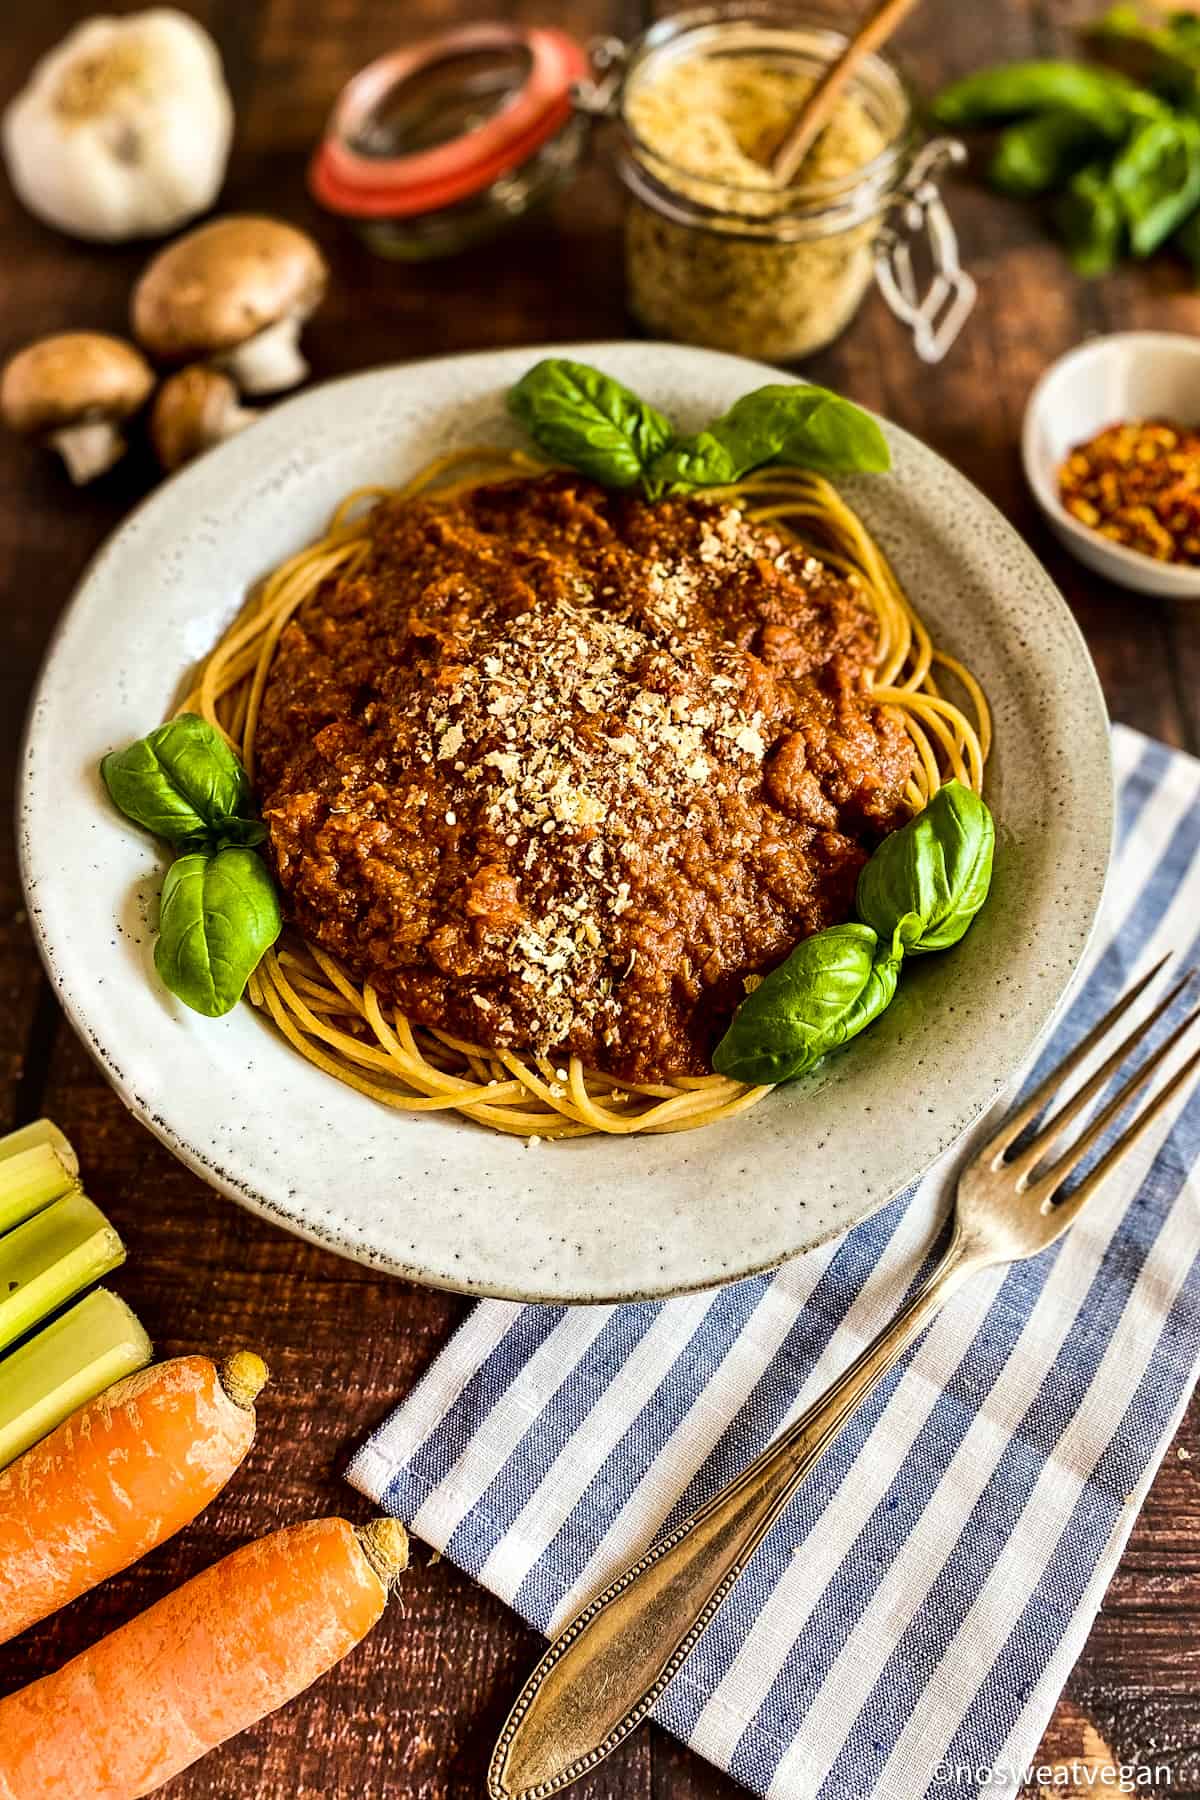 Vegan Bolognese with lentils and mushrooms.